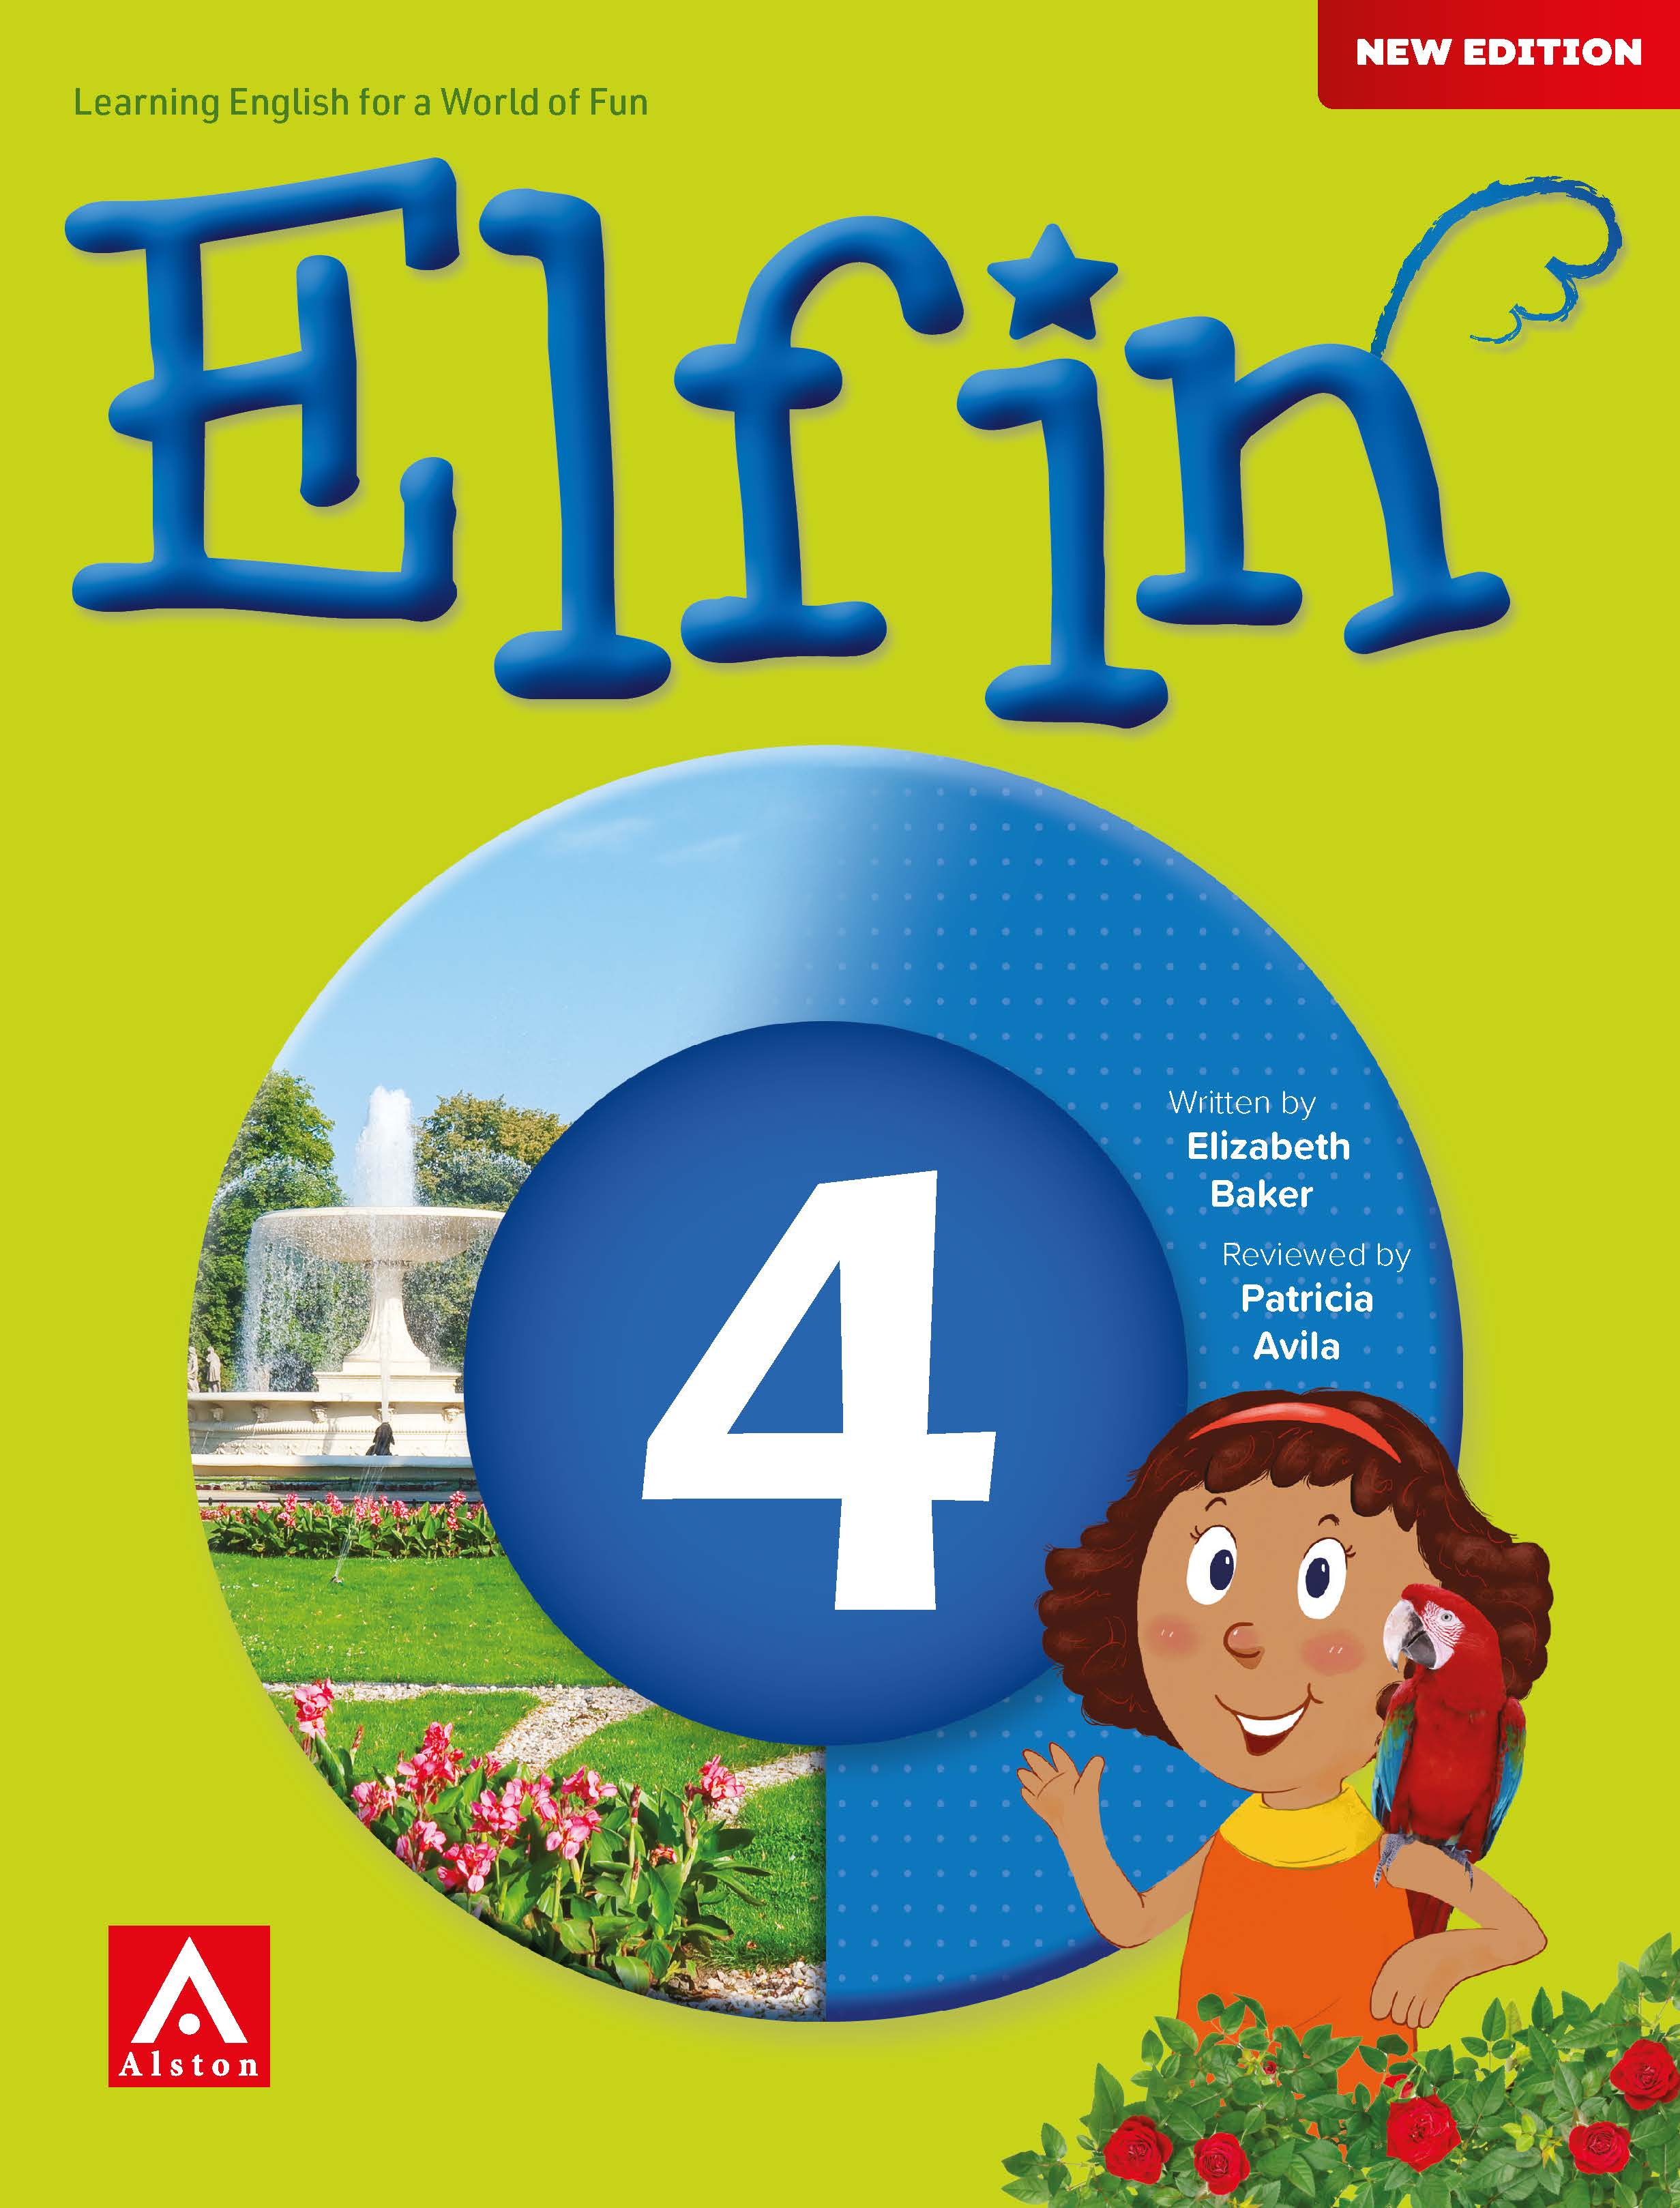 Elfin New Edition Cover SB TG 1 6 Page 04